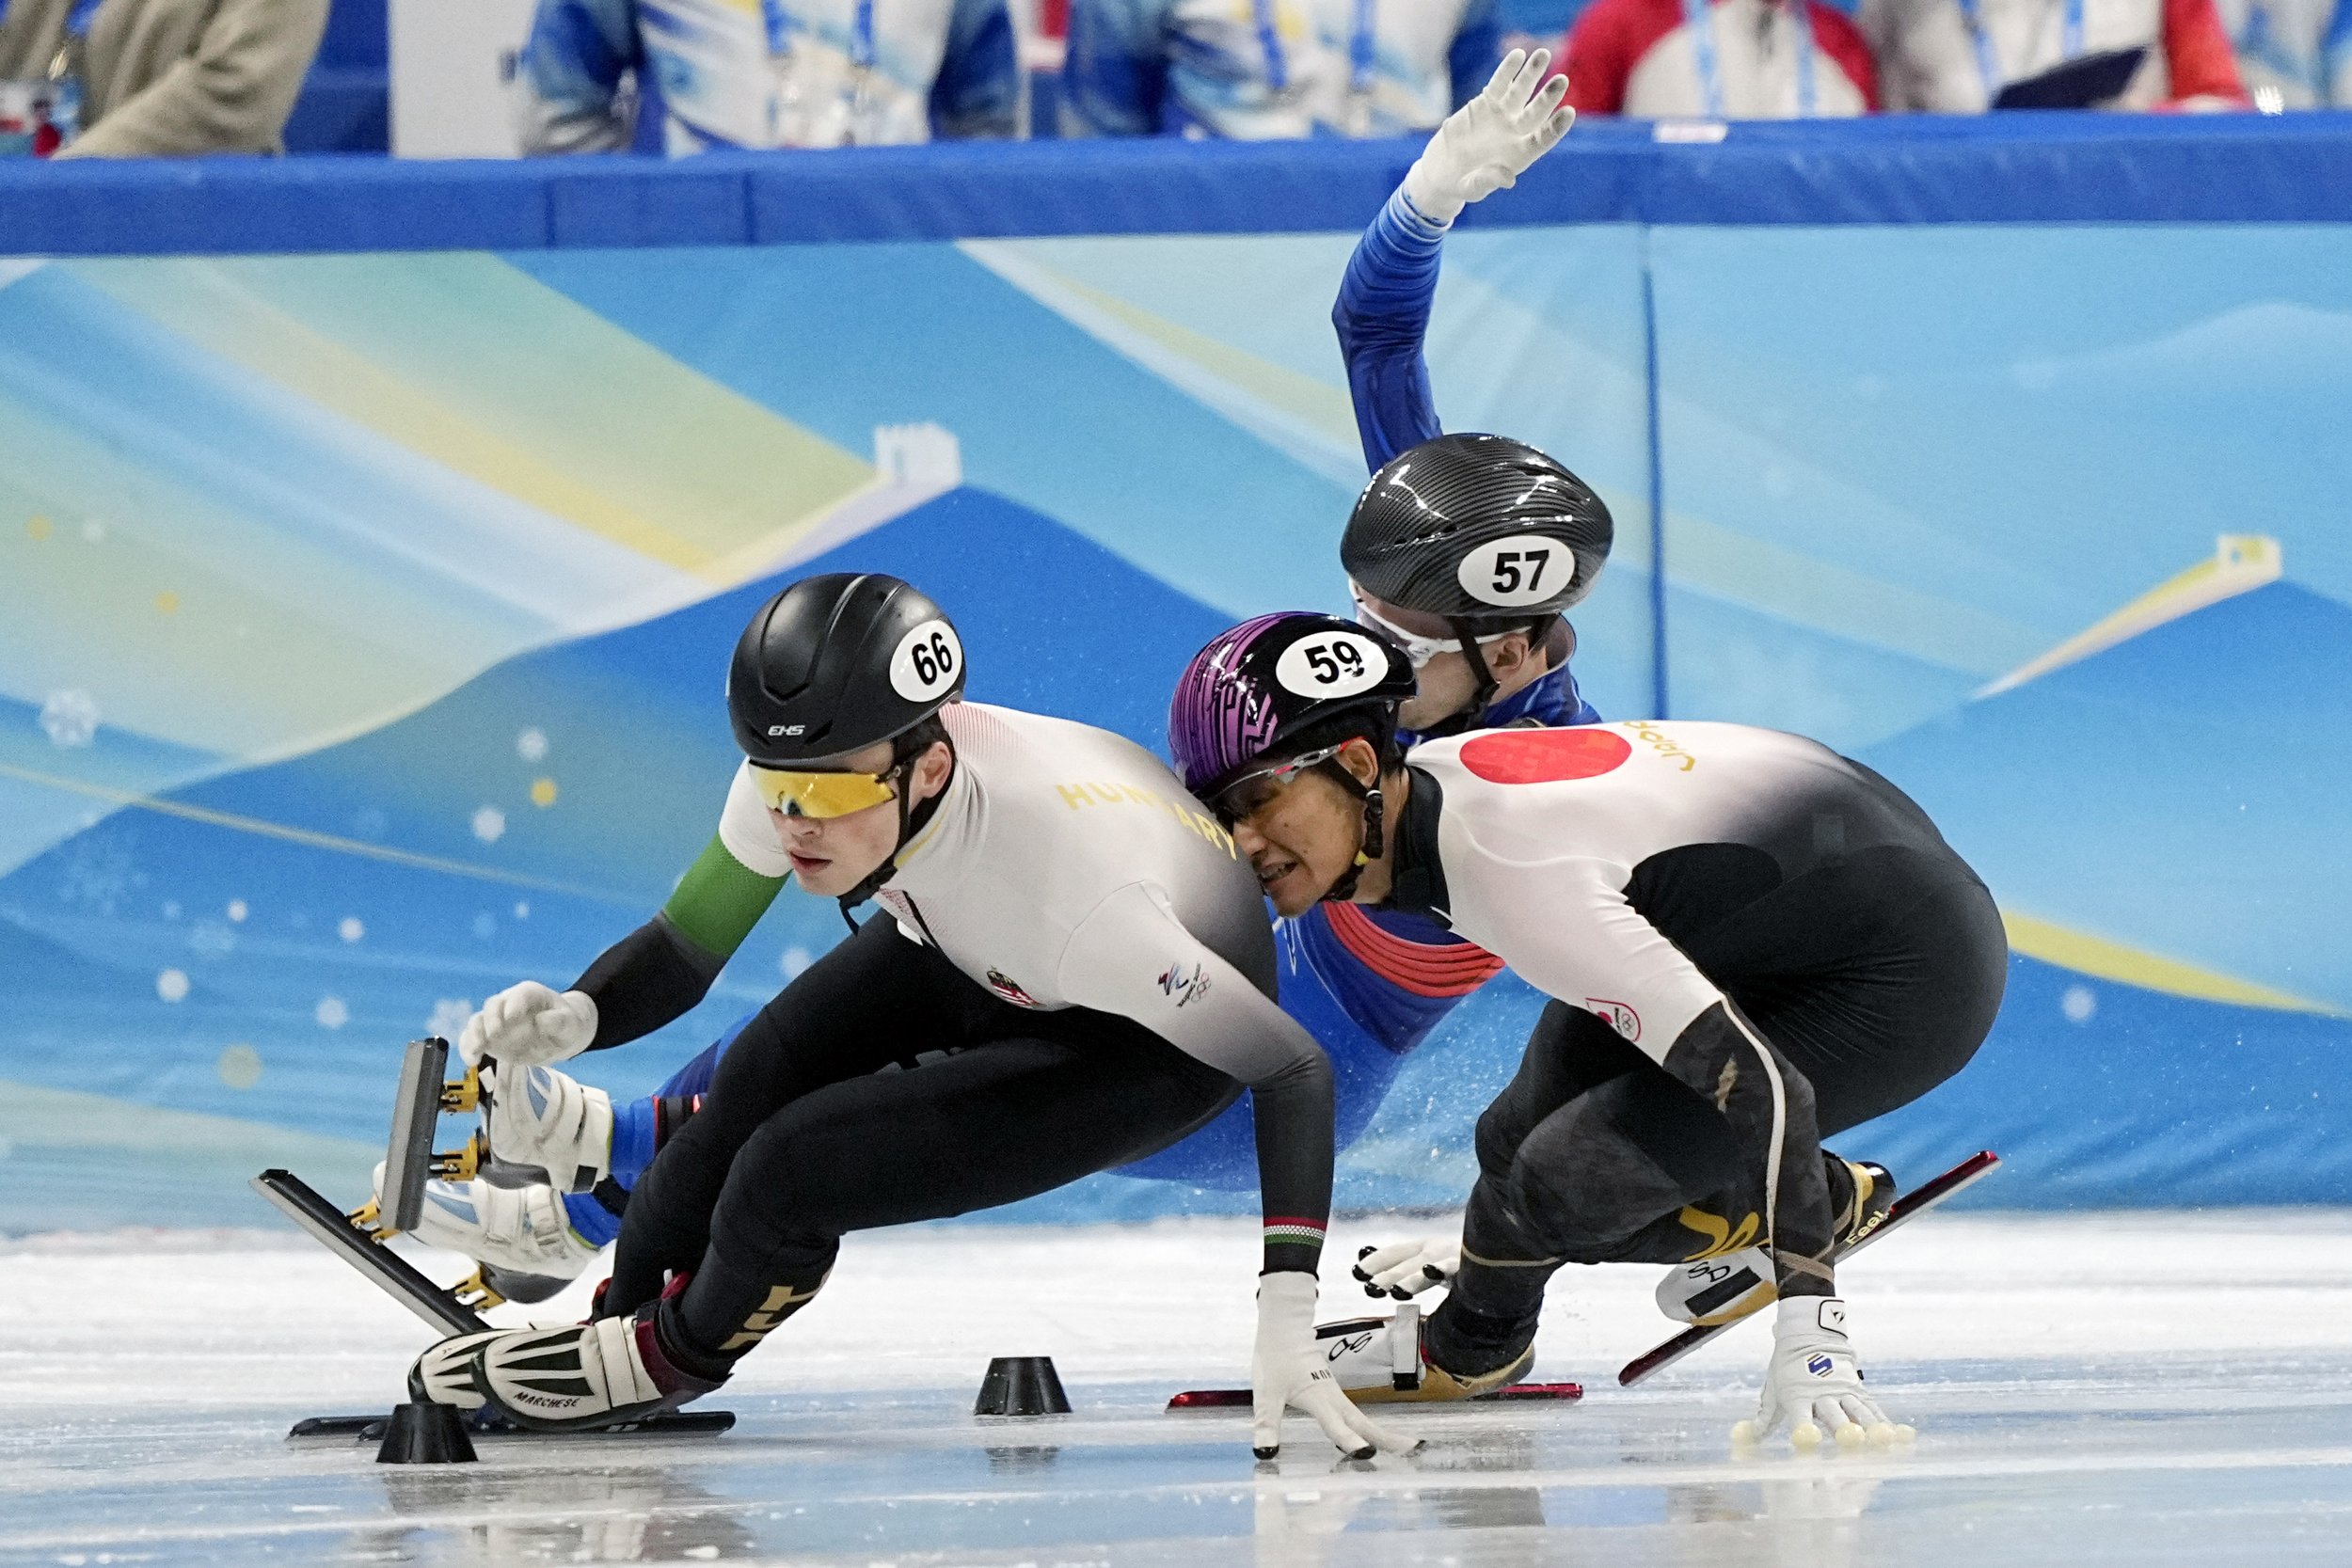  John-Henry Krueger, left, of Hungary leads Kazuki Yoshinaga of Japan and Denis Airapetian of the Russian Olympic Committee as they collide during their heat of the men's 1,000-meter the short track speedskating competition at the 2022 Winter Olympic